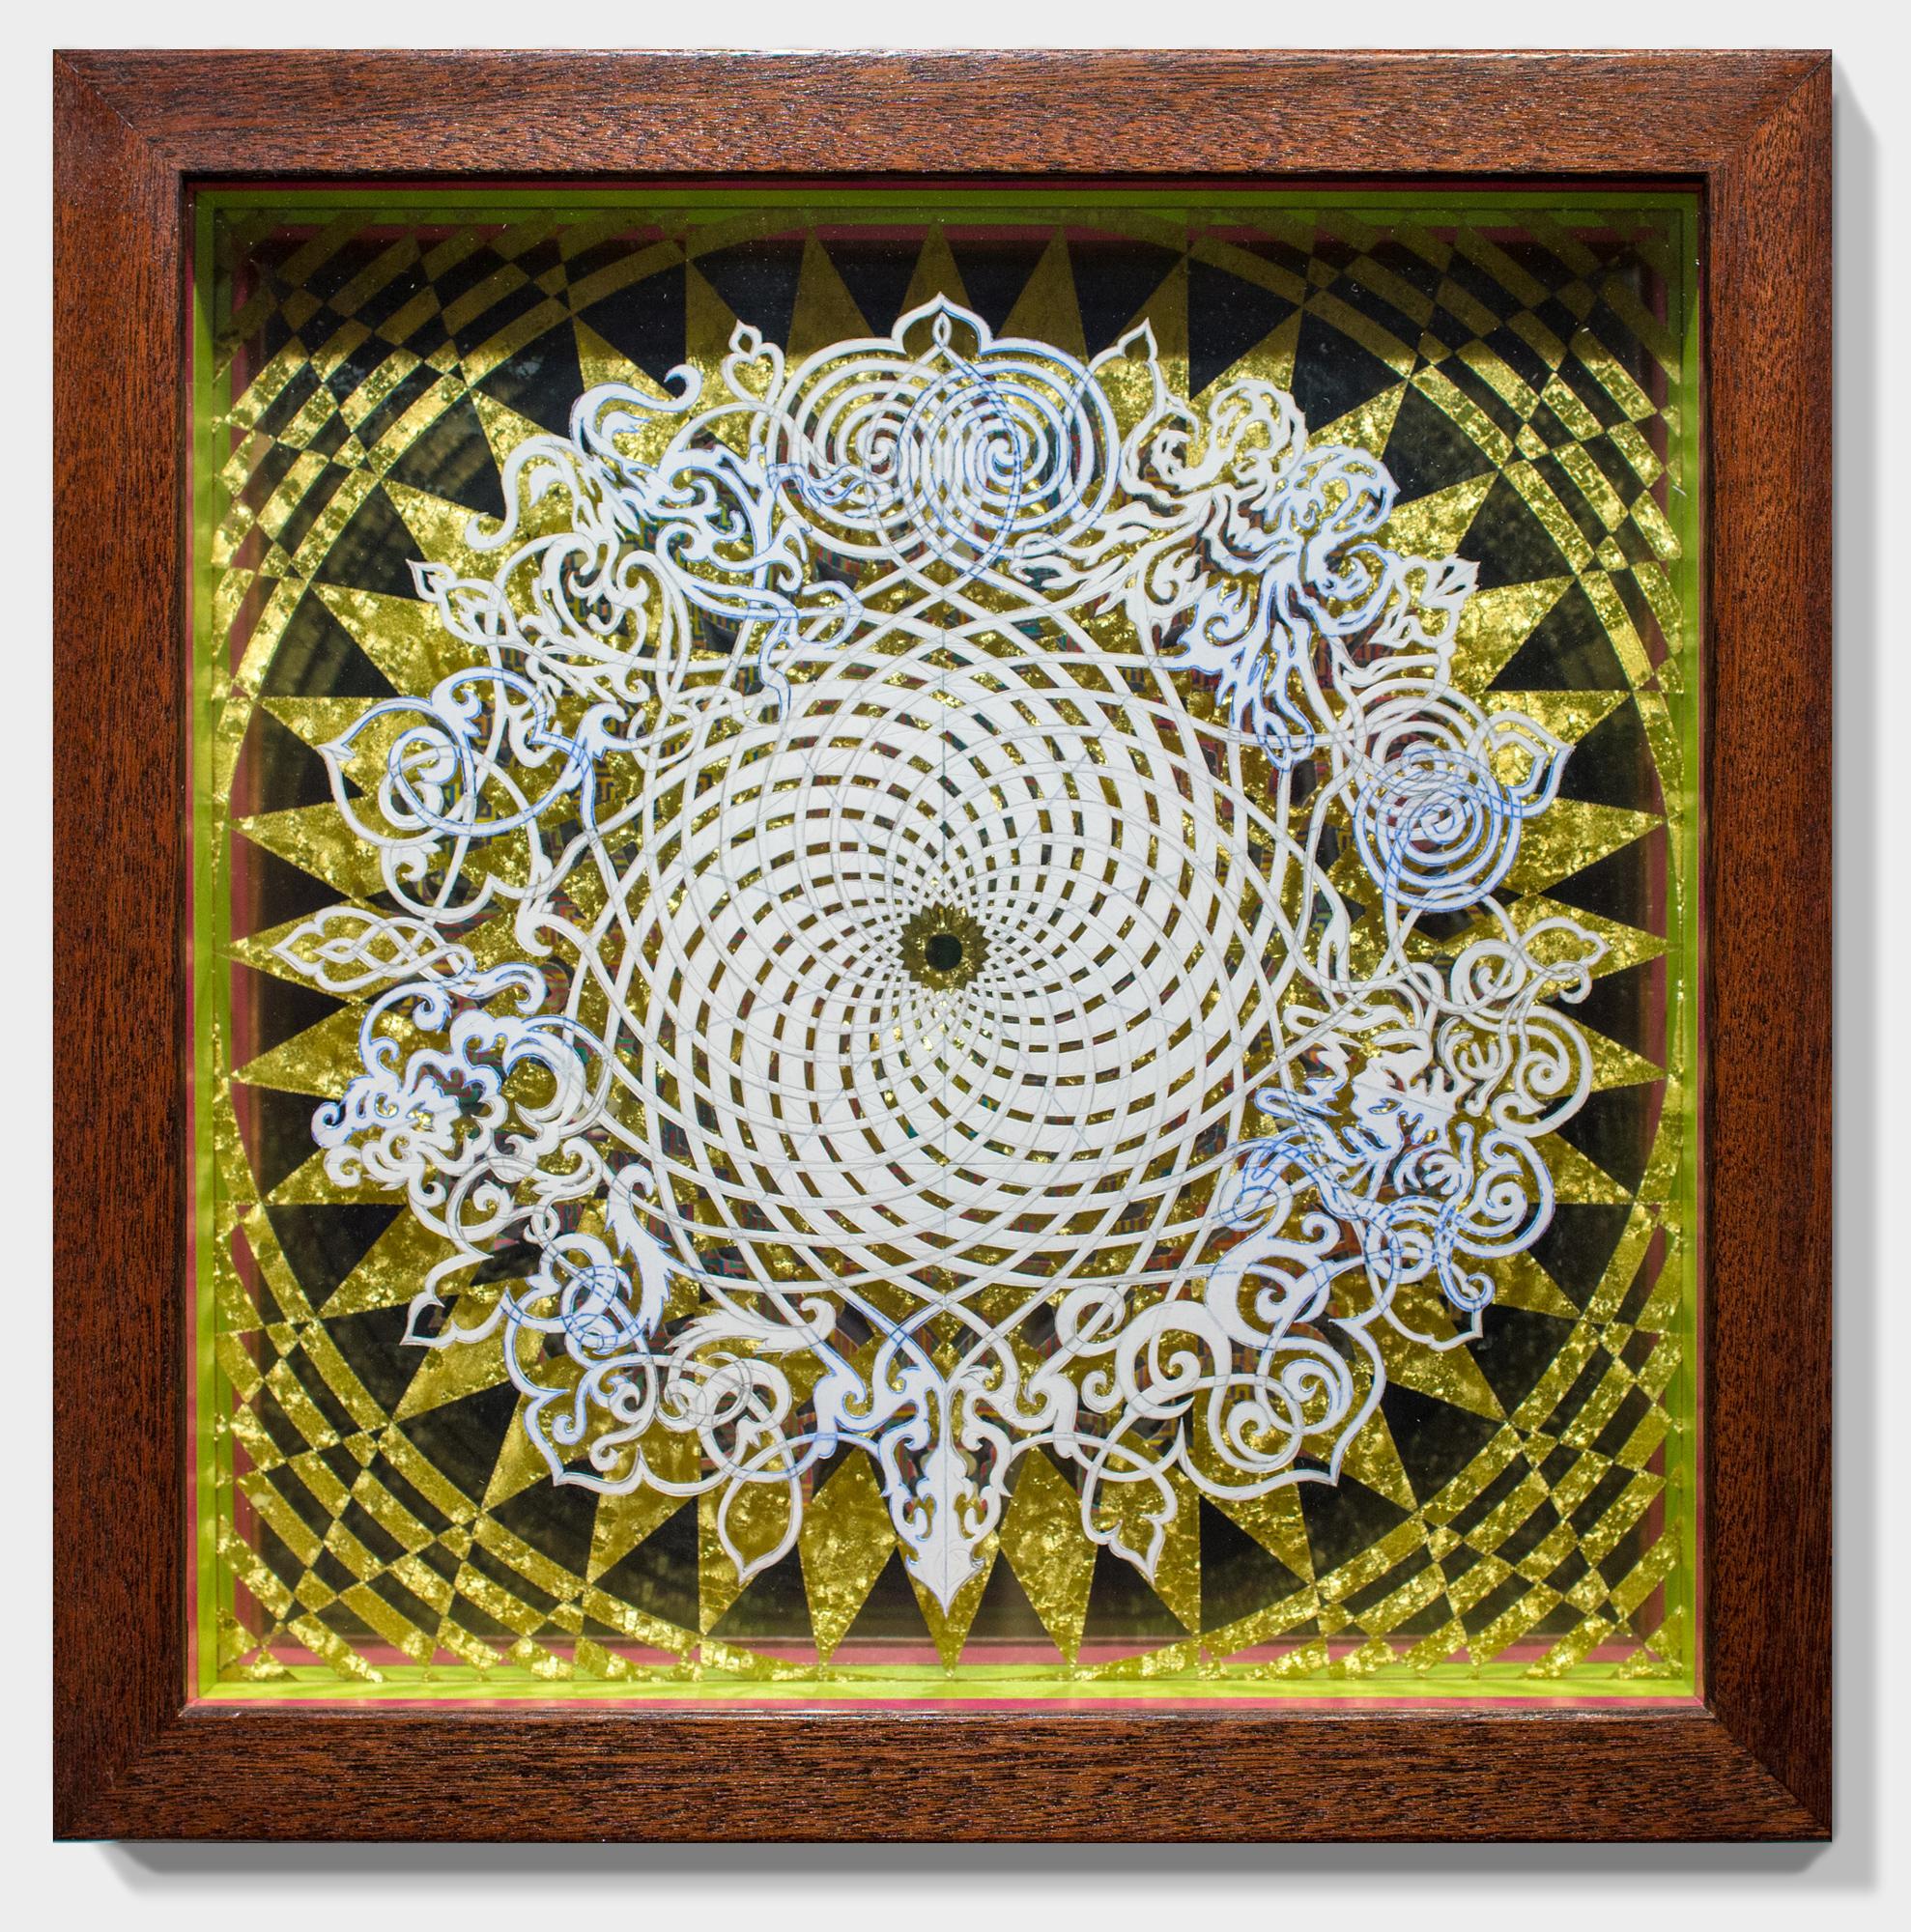 This is an original wall-hanging, hand-cut, paper sculpture by Hunter Stabler measuring 13.5”h x 13.5”w x 2.5”d framed. The front layer is made from graphite and transfer paper on the reverse of hand-cut archival digital pigment print mounted to